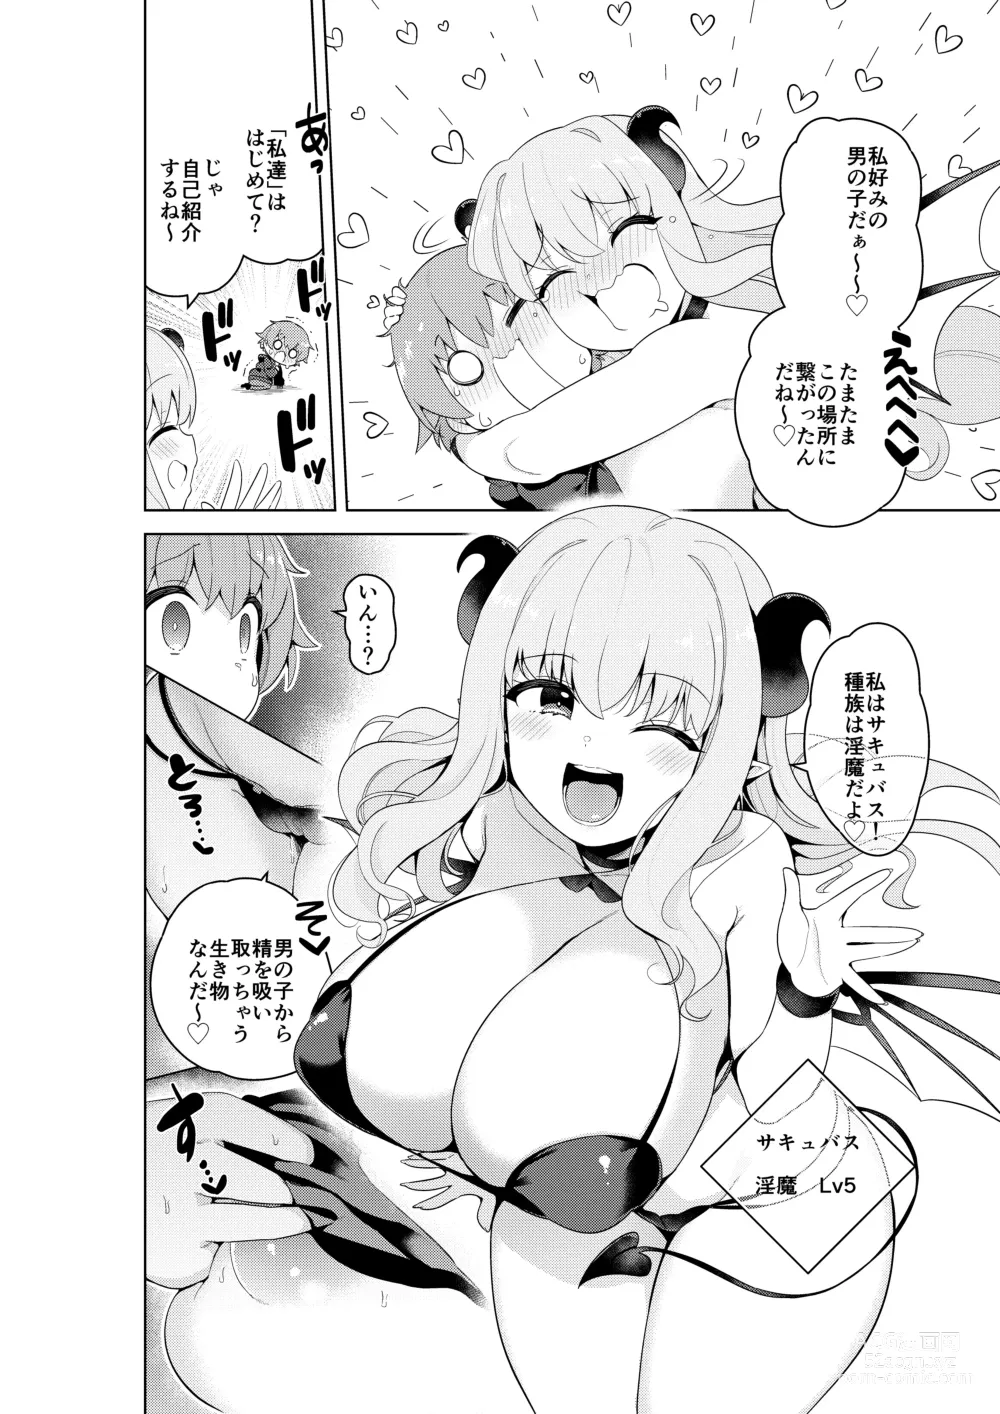 Page 5 of doujinshi Succubus in Wonderland: Comicalize!